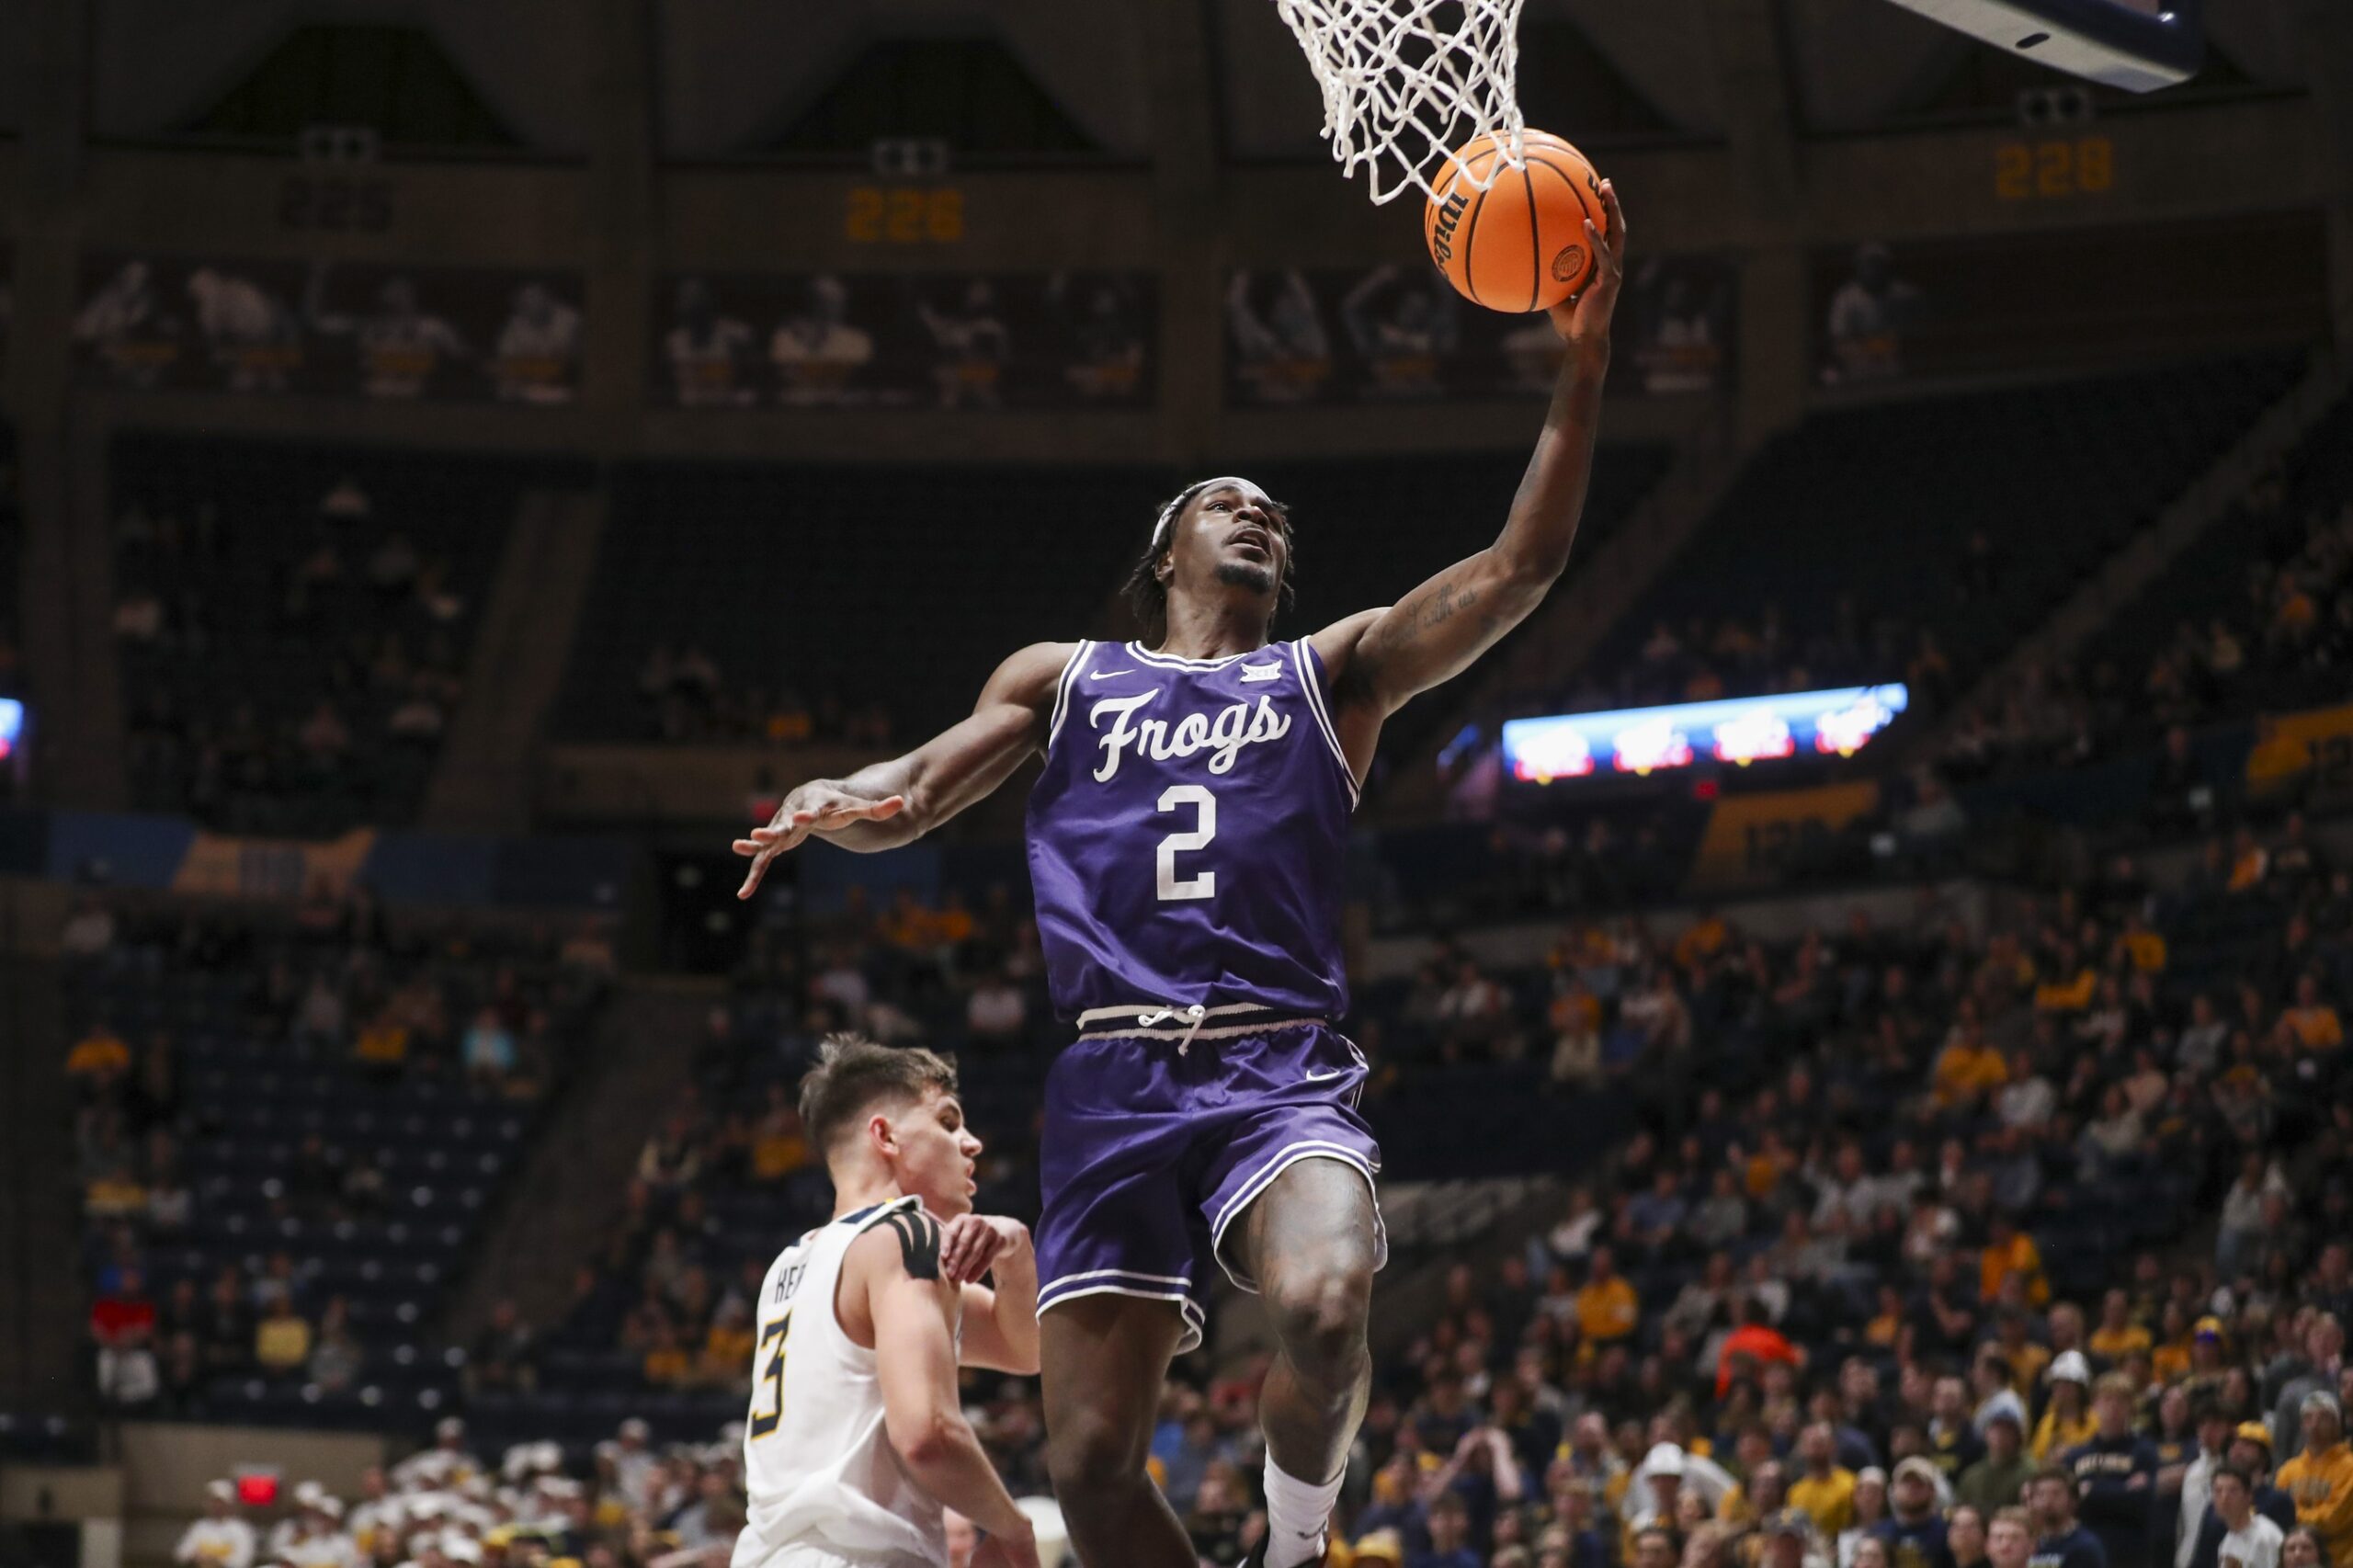 TCU Horned Frogs forward Emanuel Miller (2) shoots in the lane during the first half against the West Virginia Mountaineers at WVU Coliseum. Mandatory Credit: Ben Queen-USA TODAY Sports